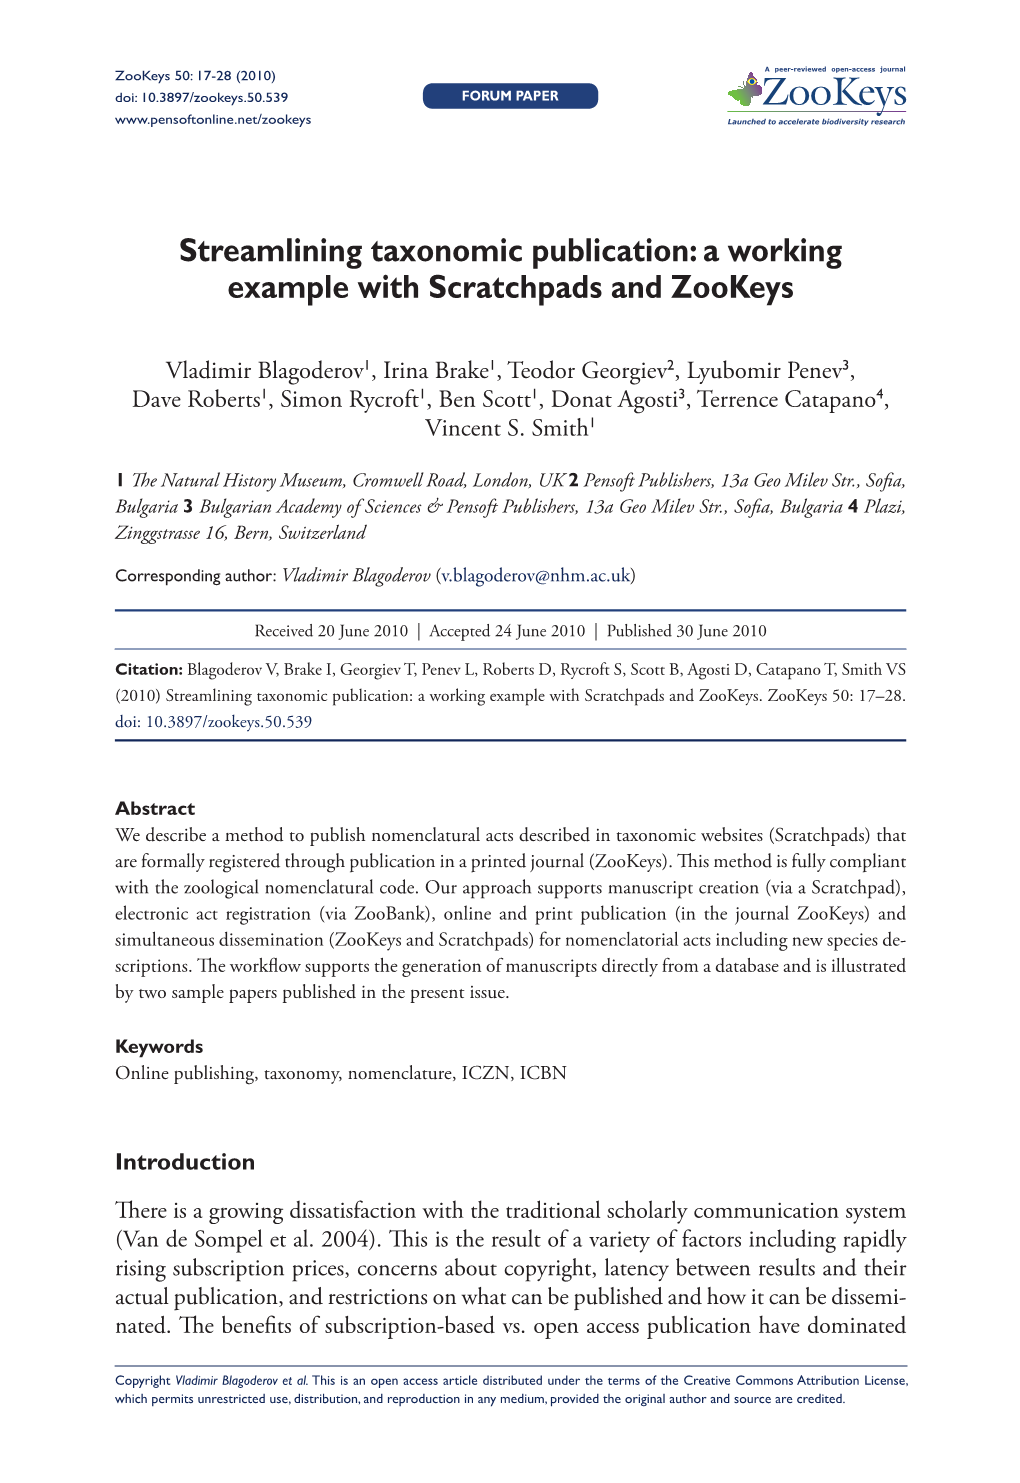 Streamlining Taxonomic Publication: a Working Example with Scratchpads and Zookeys